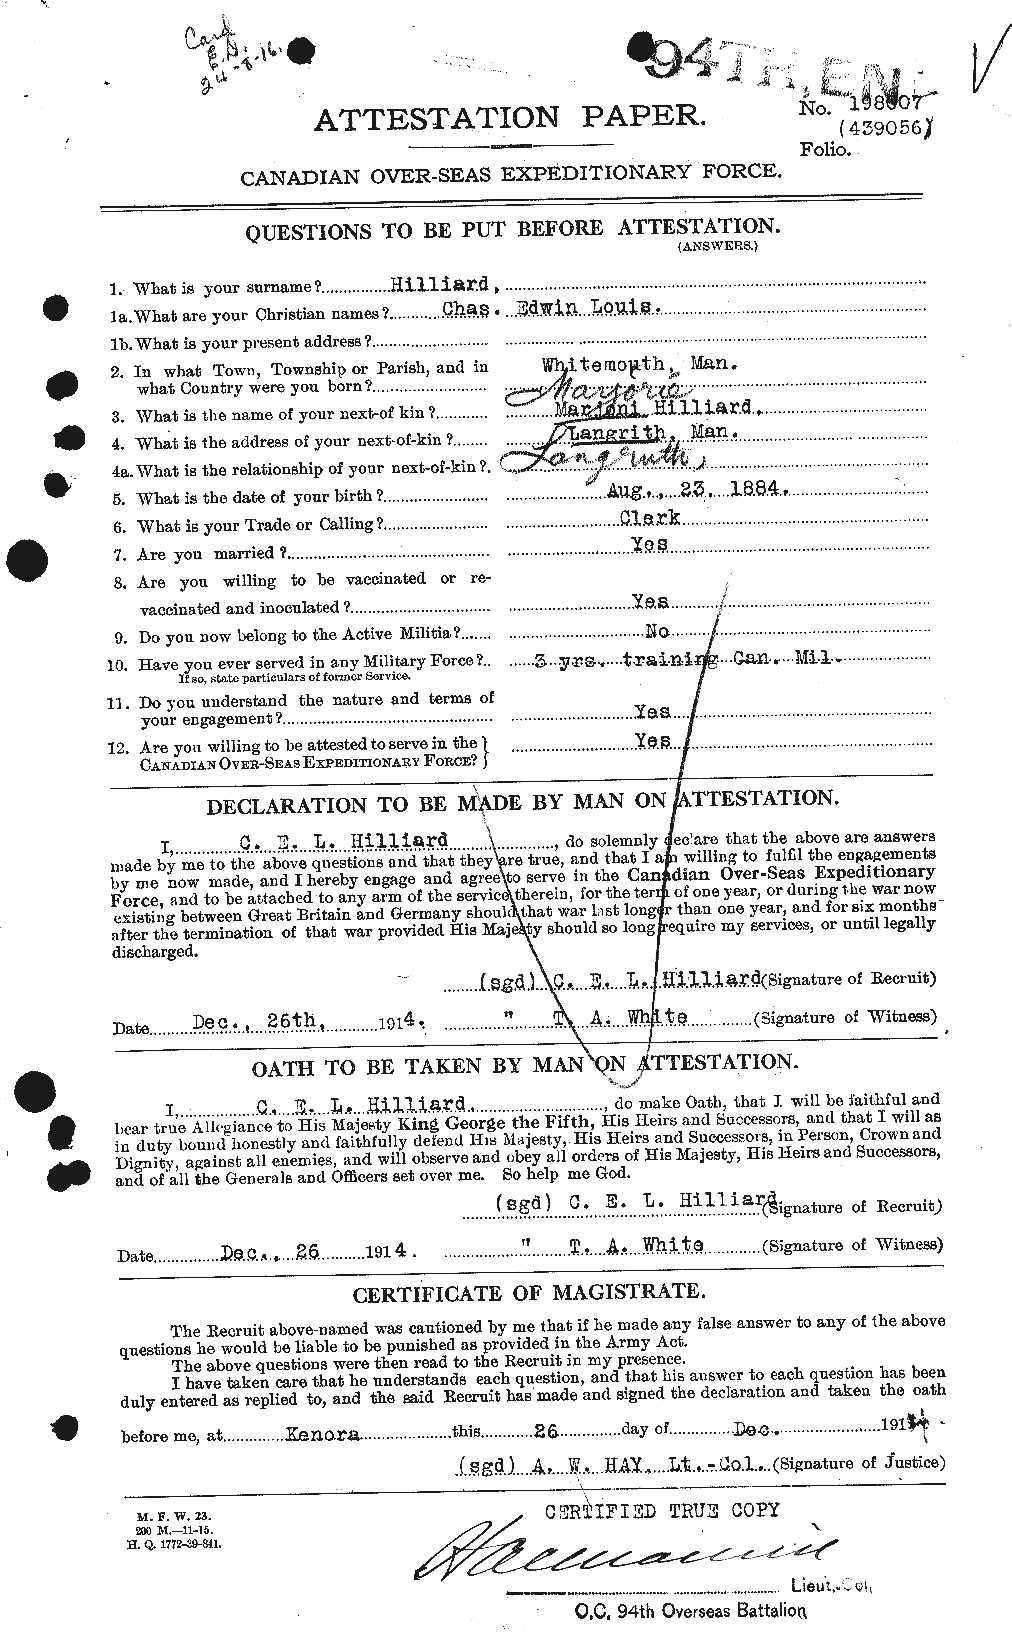 Personnel Records of the First World War - CEF 393602a